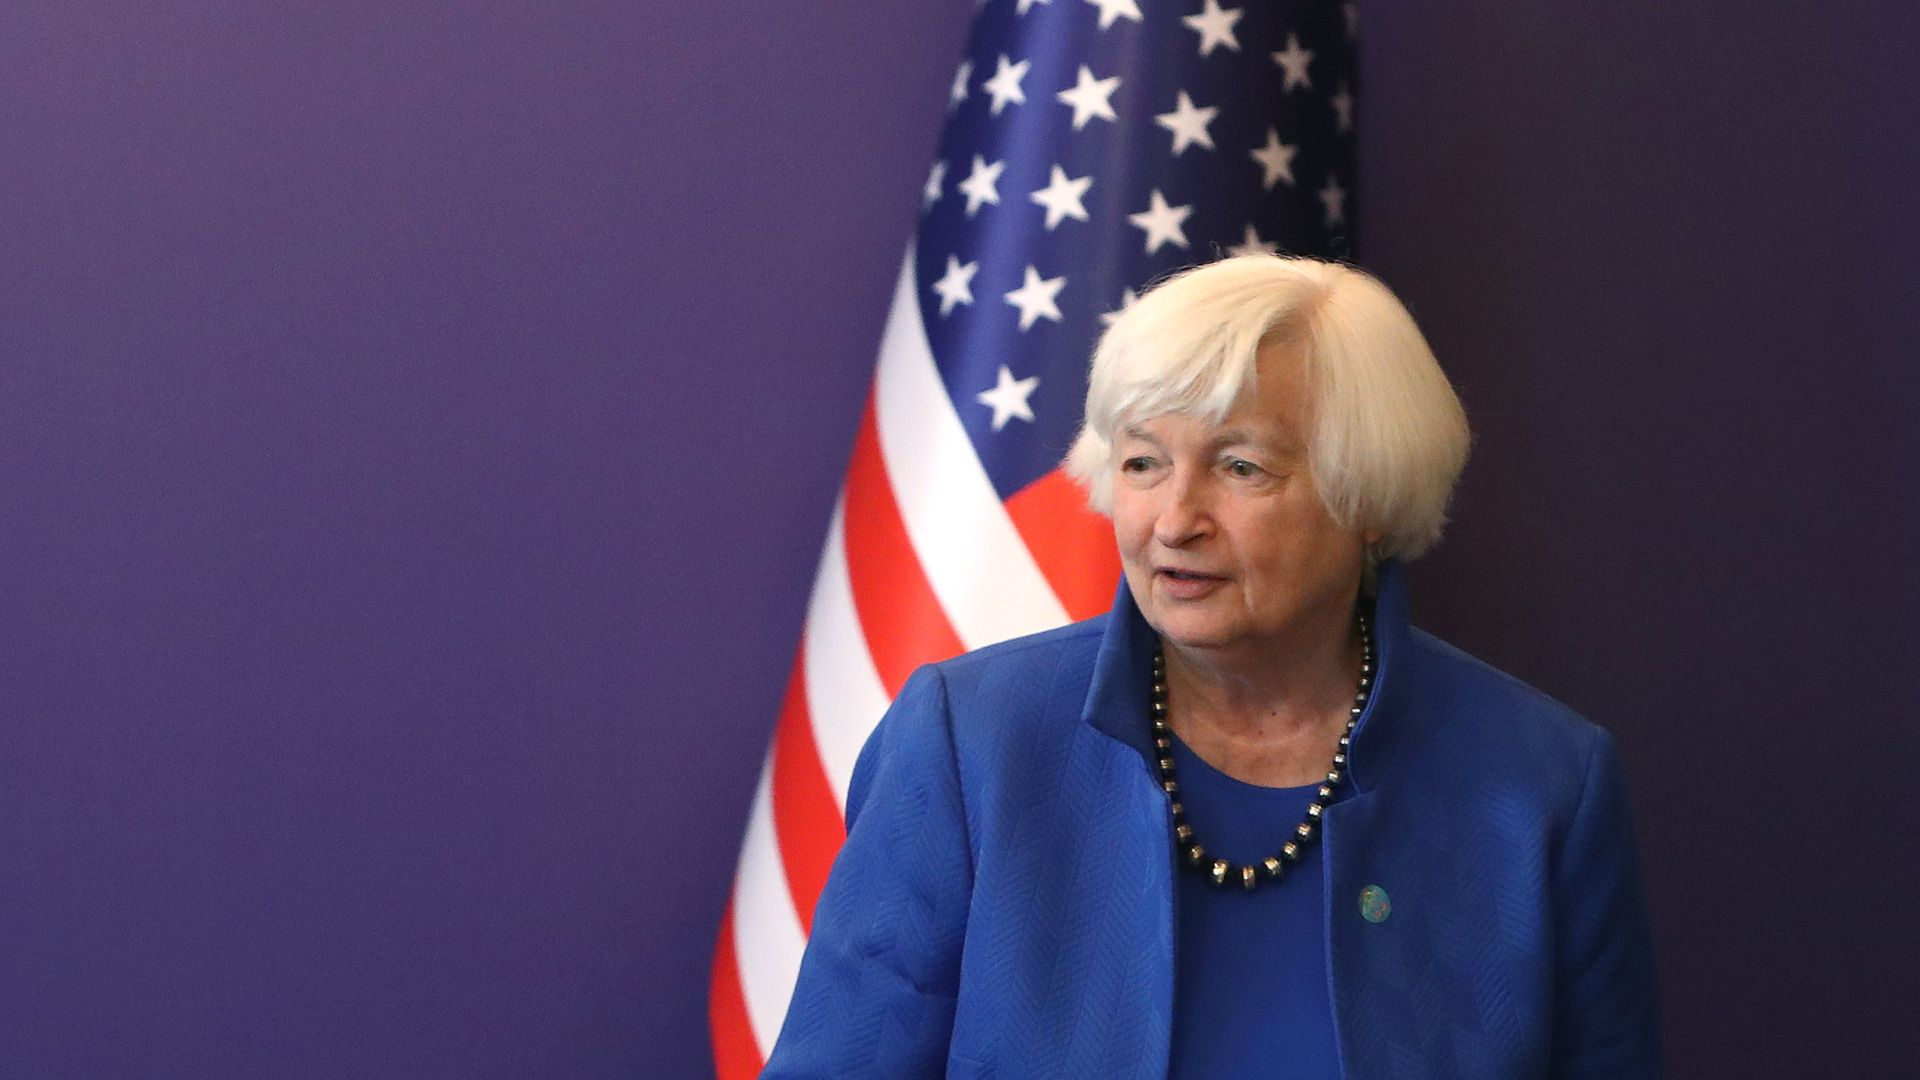 Janet Yellen standing next to an American flag